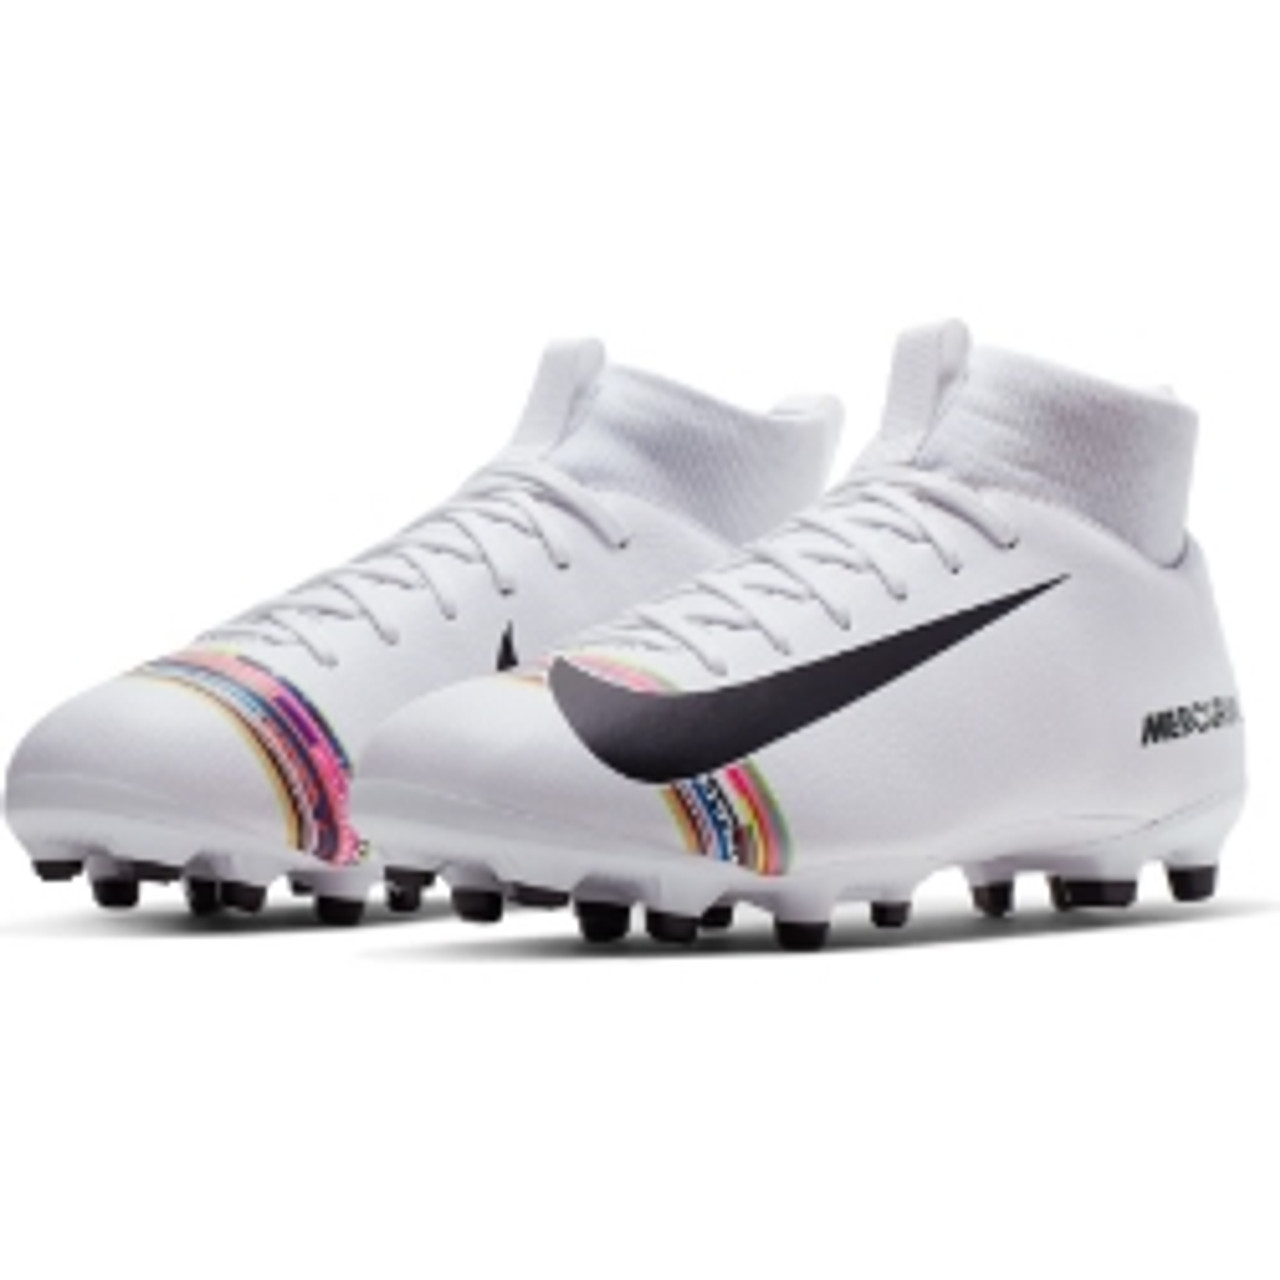 NIKE Superfly 6 Academy IC Mercurial Soccer Shoes Size 9.